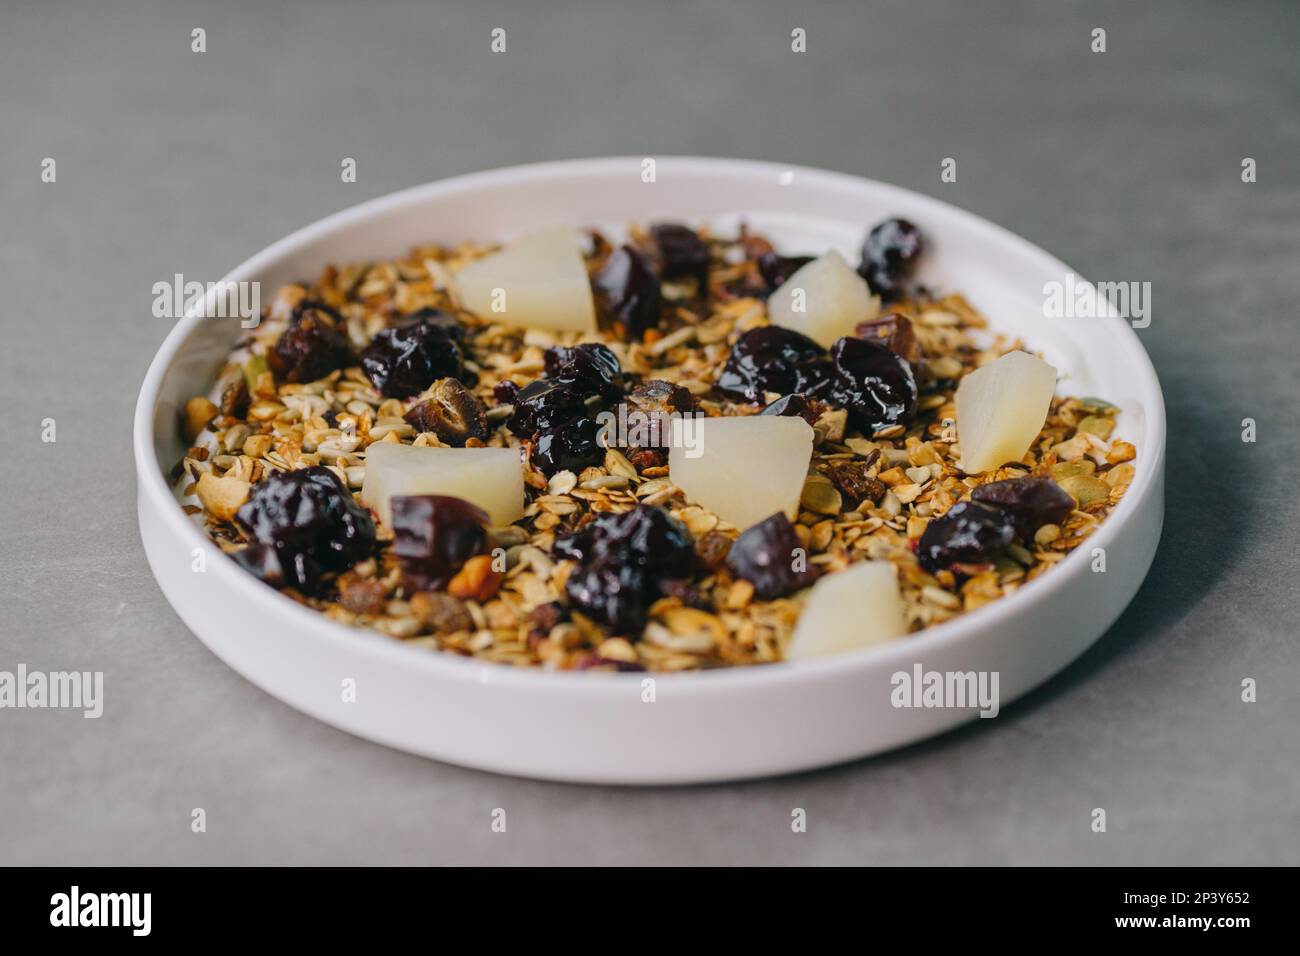 Delicious muesli on a plate in a restaurant. Stock Photo